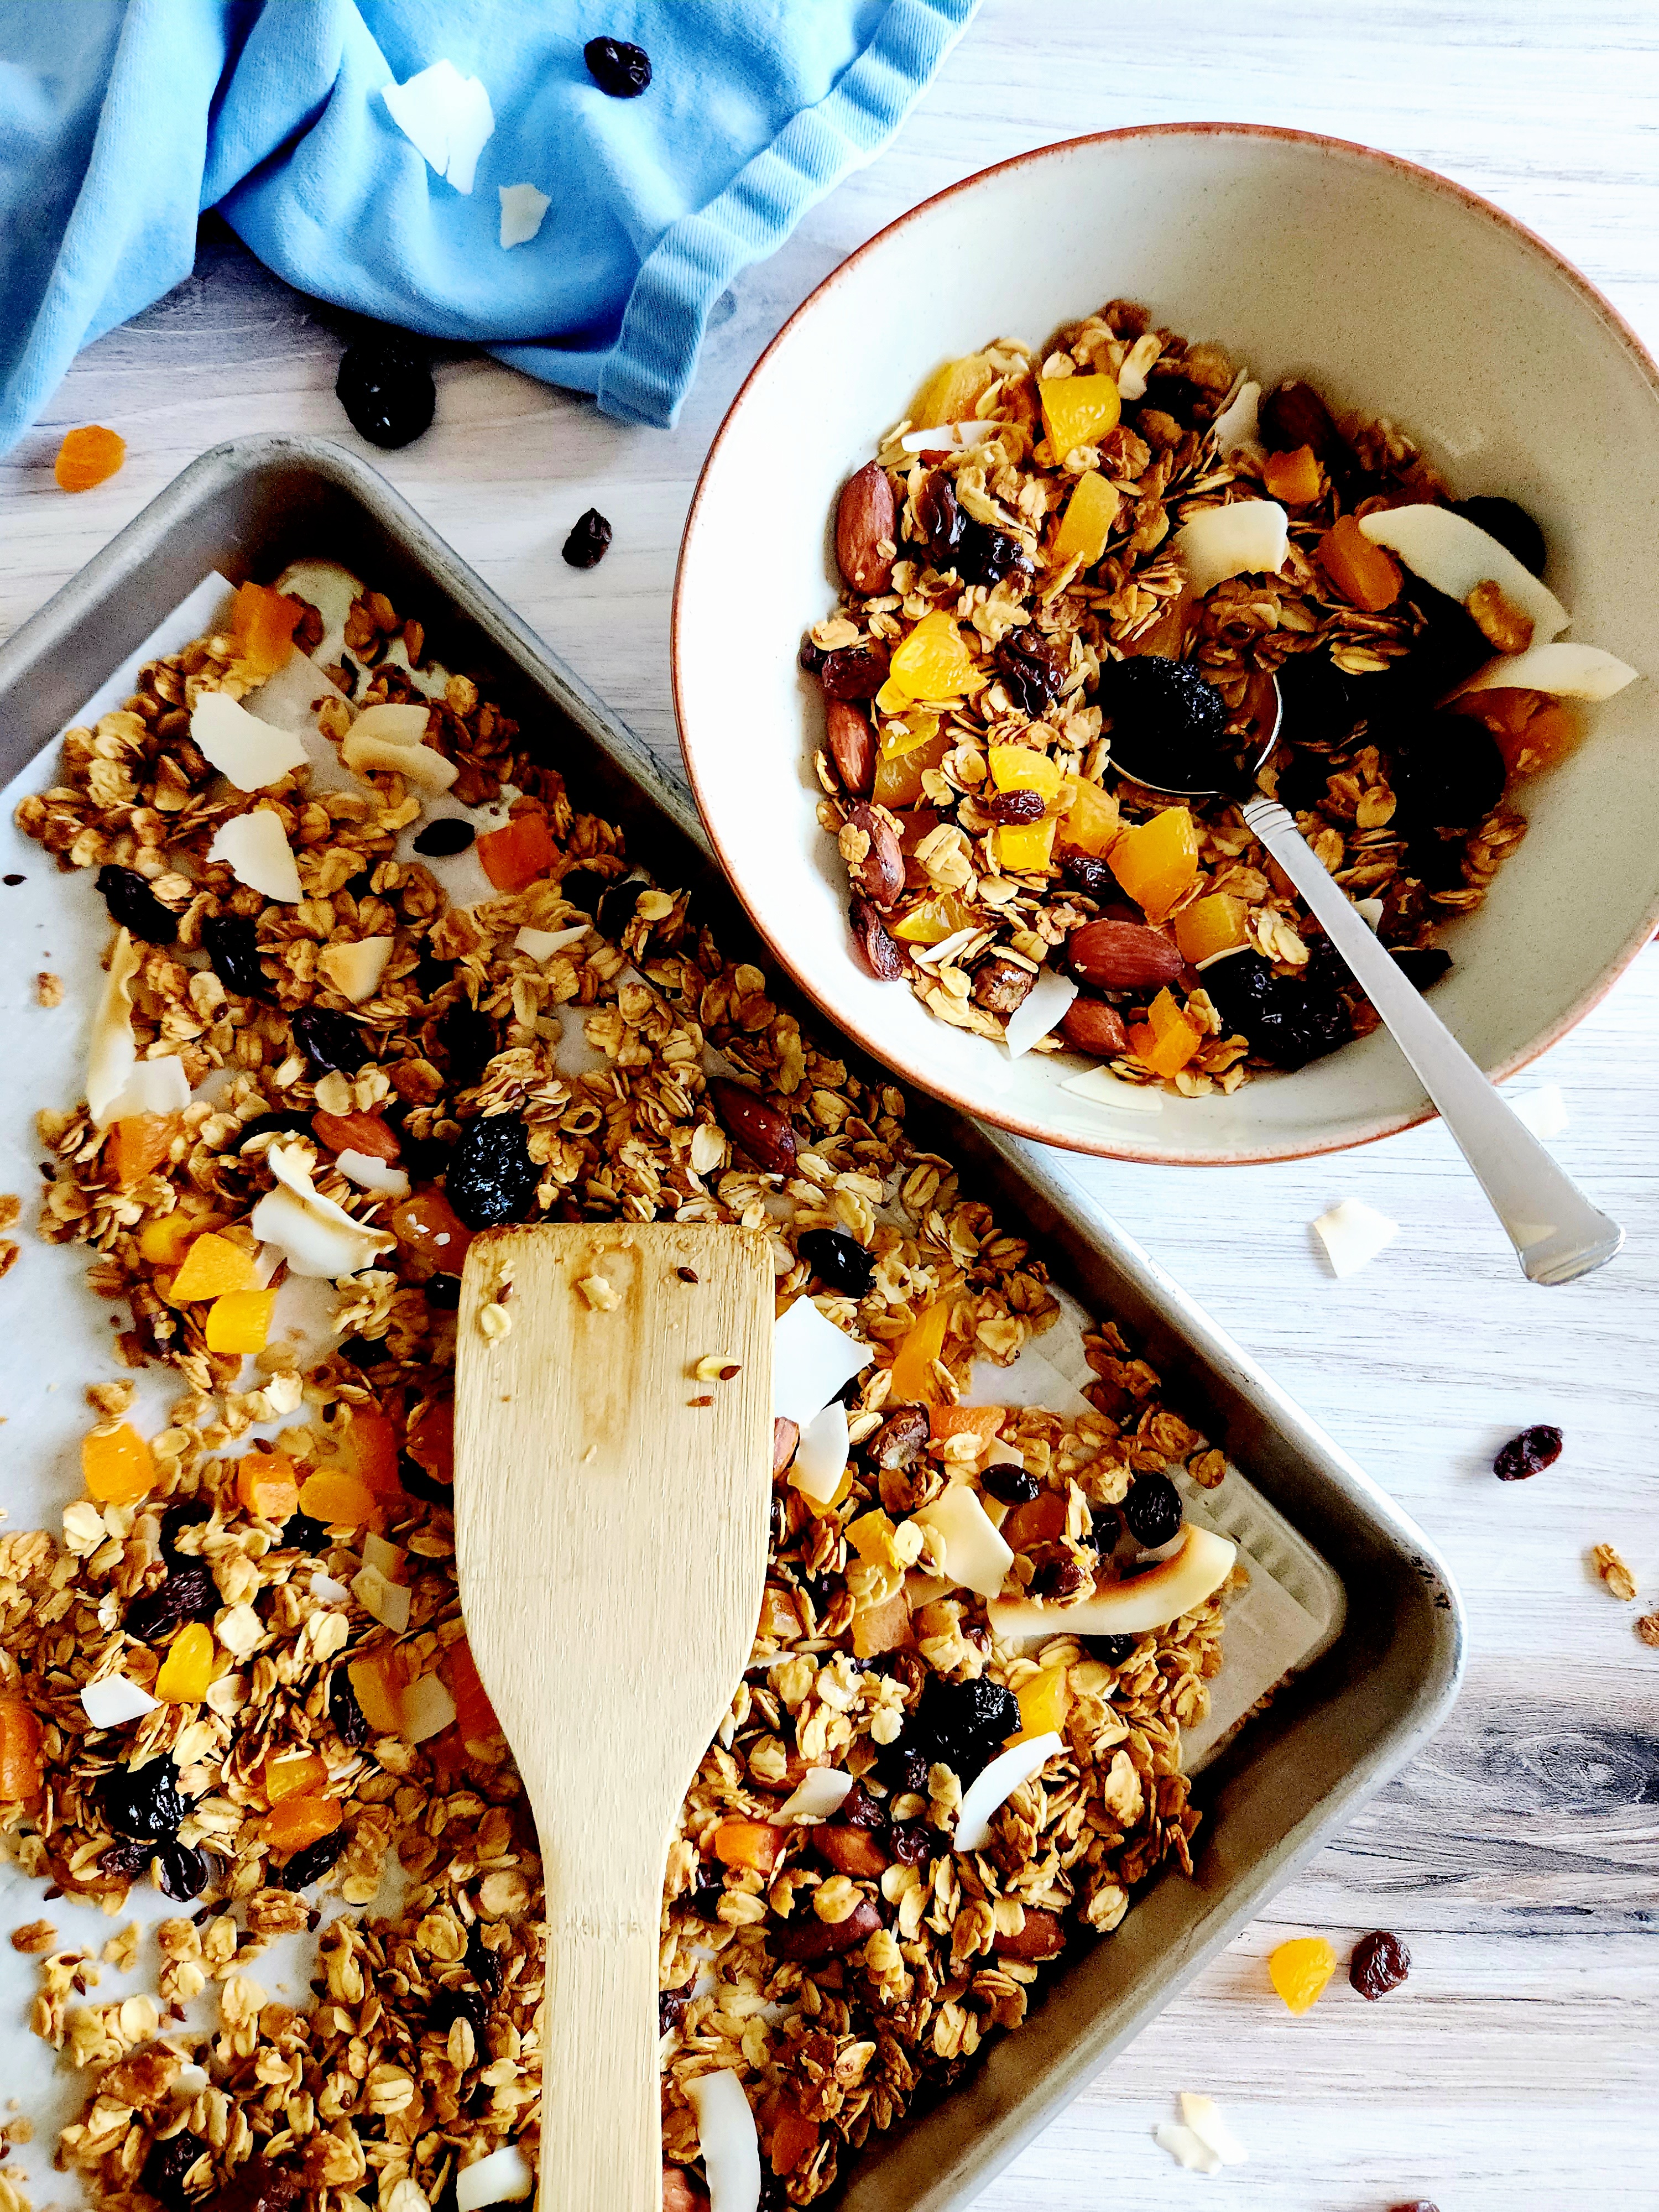 Easy Homemade Granola with Fruit and Nuts (Recipe Inspired By Lockdown On London Lane)